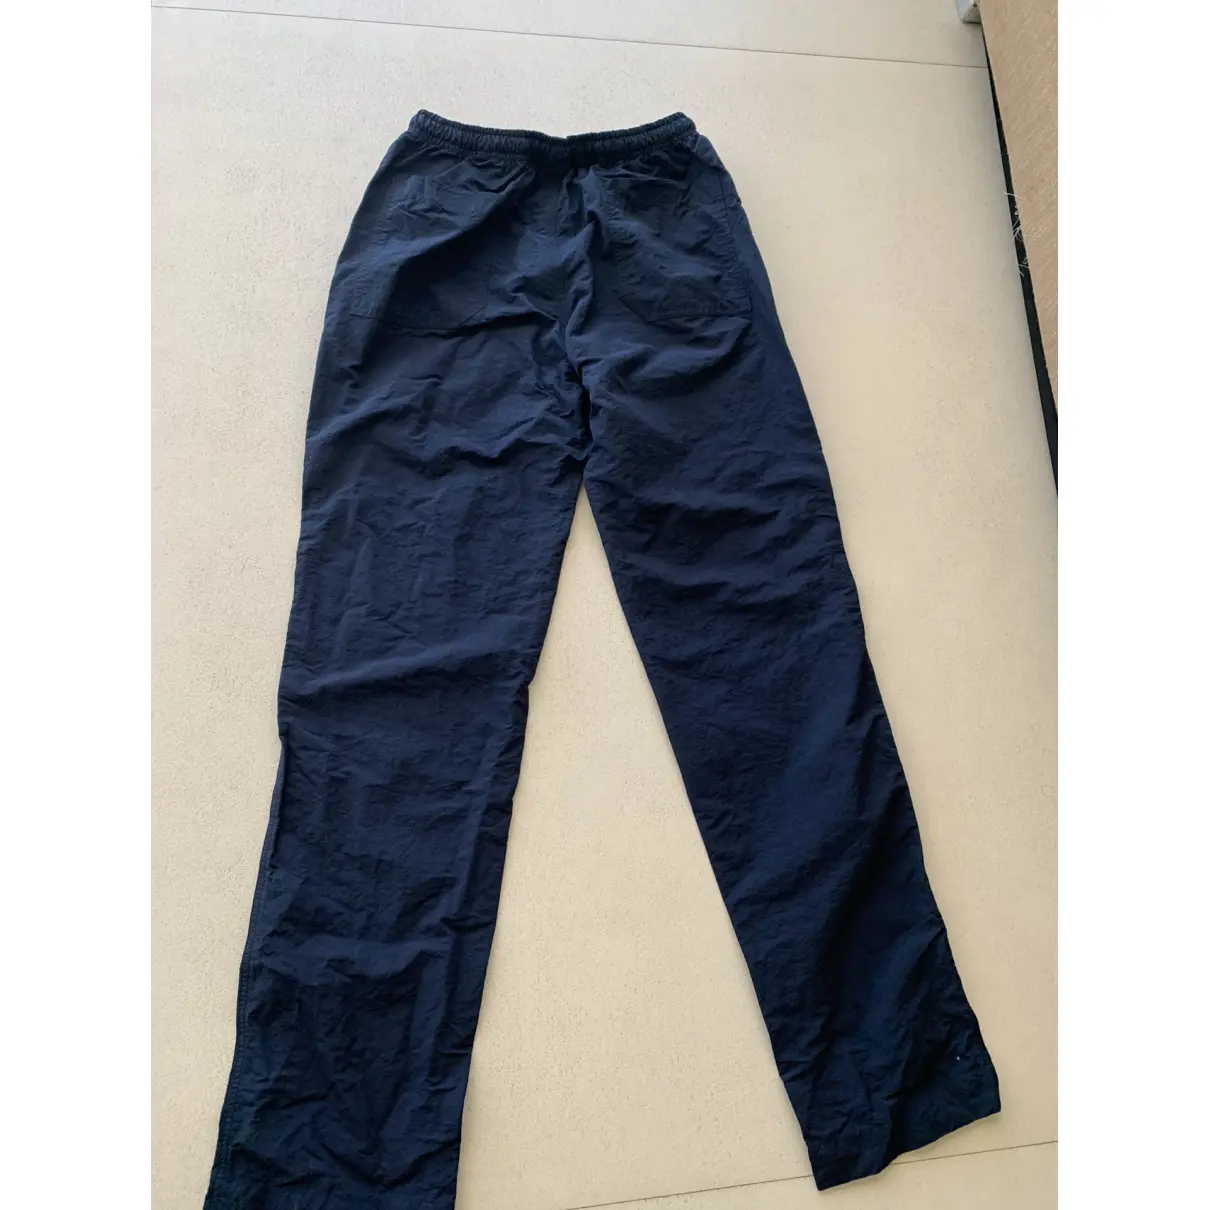 Buy Incotex Trousers online